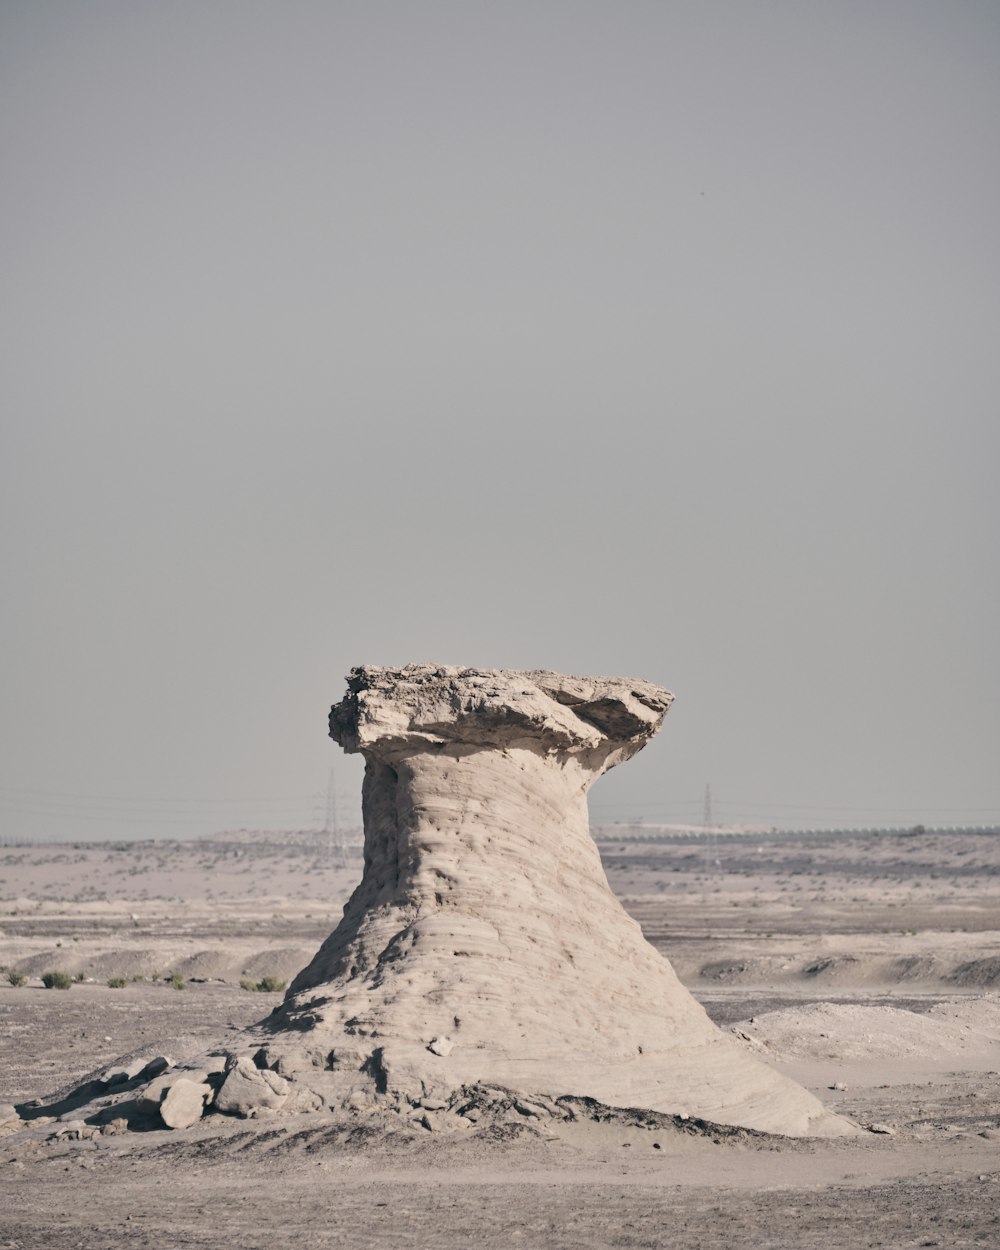 a large rock formation in the middle of a sandy area